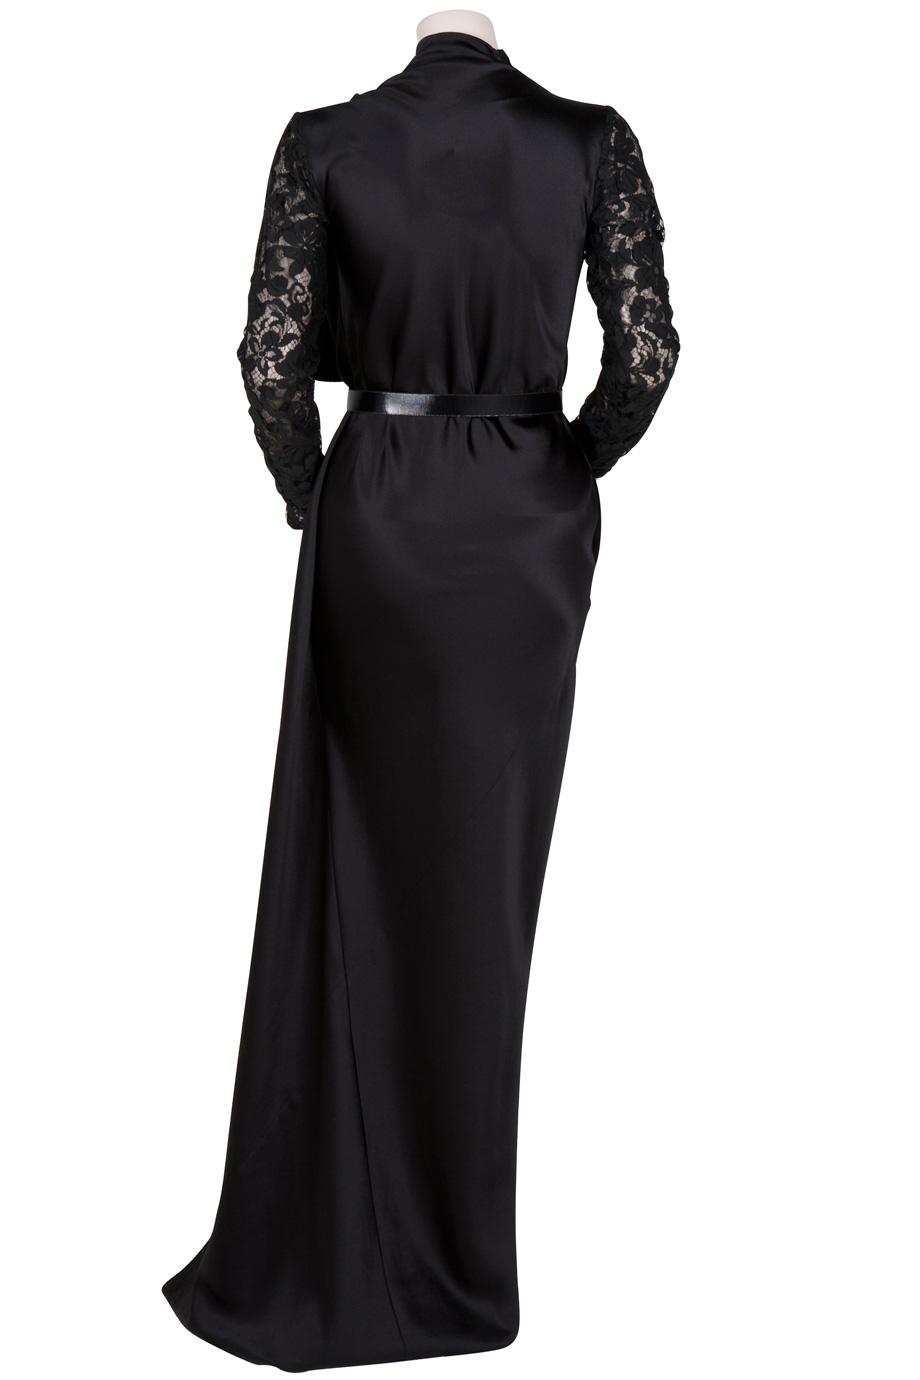 Lyst - Alessandra rich Sculpted Abaya with Lace Sleeves in Black